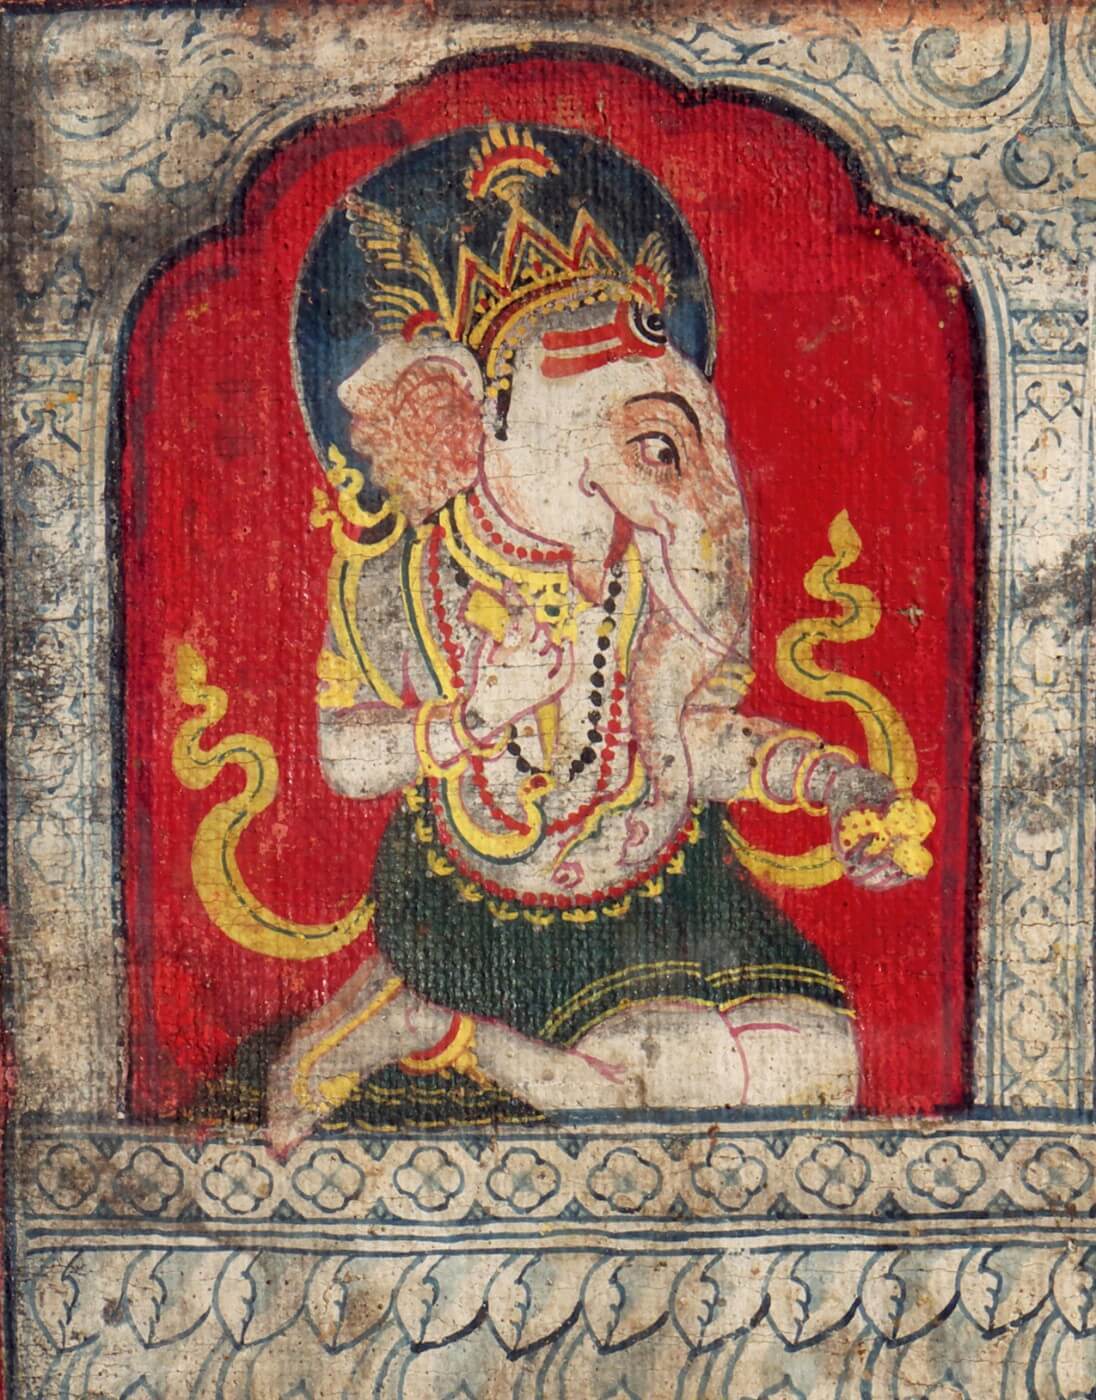 Lord Ganesha - 18th Century Vintage Painting - Art Prints by ...